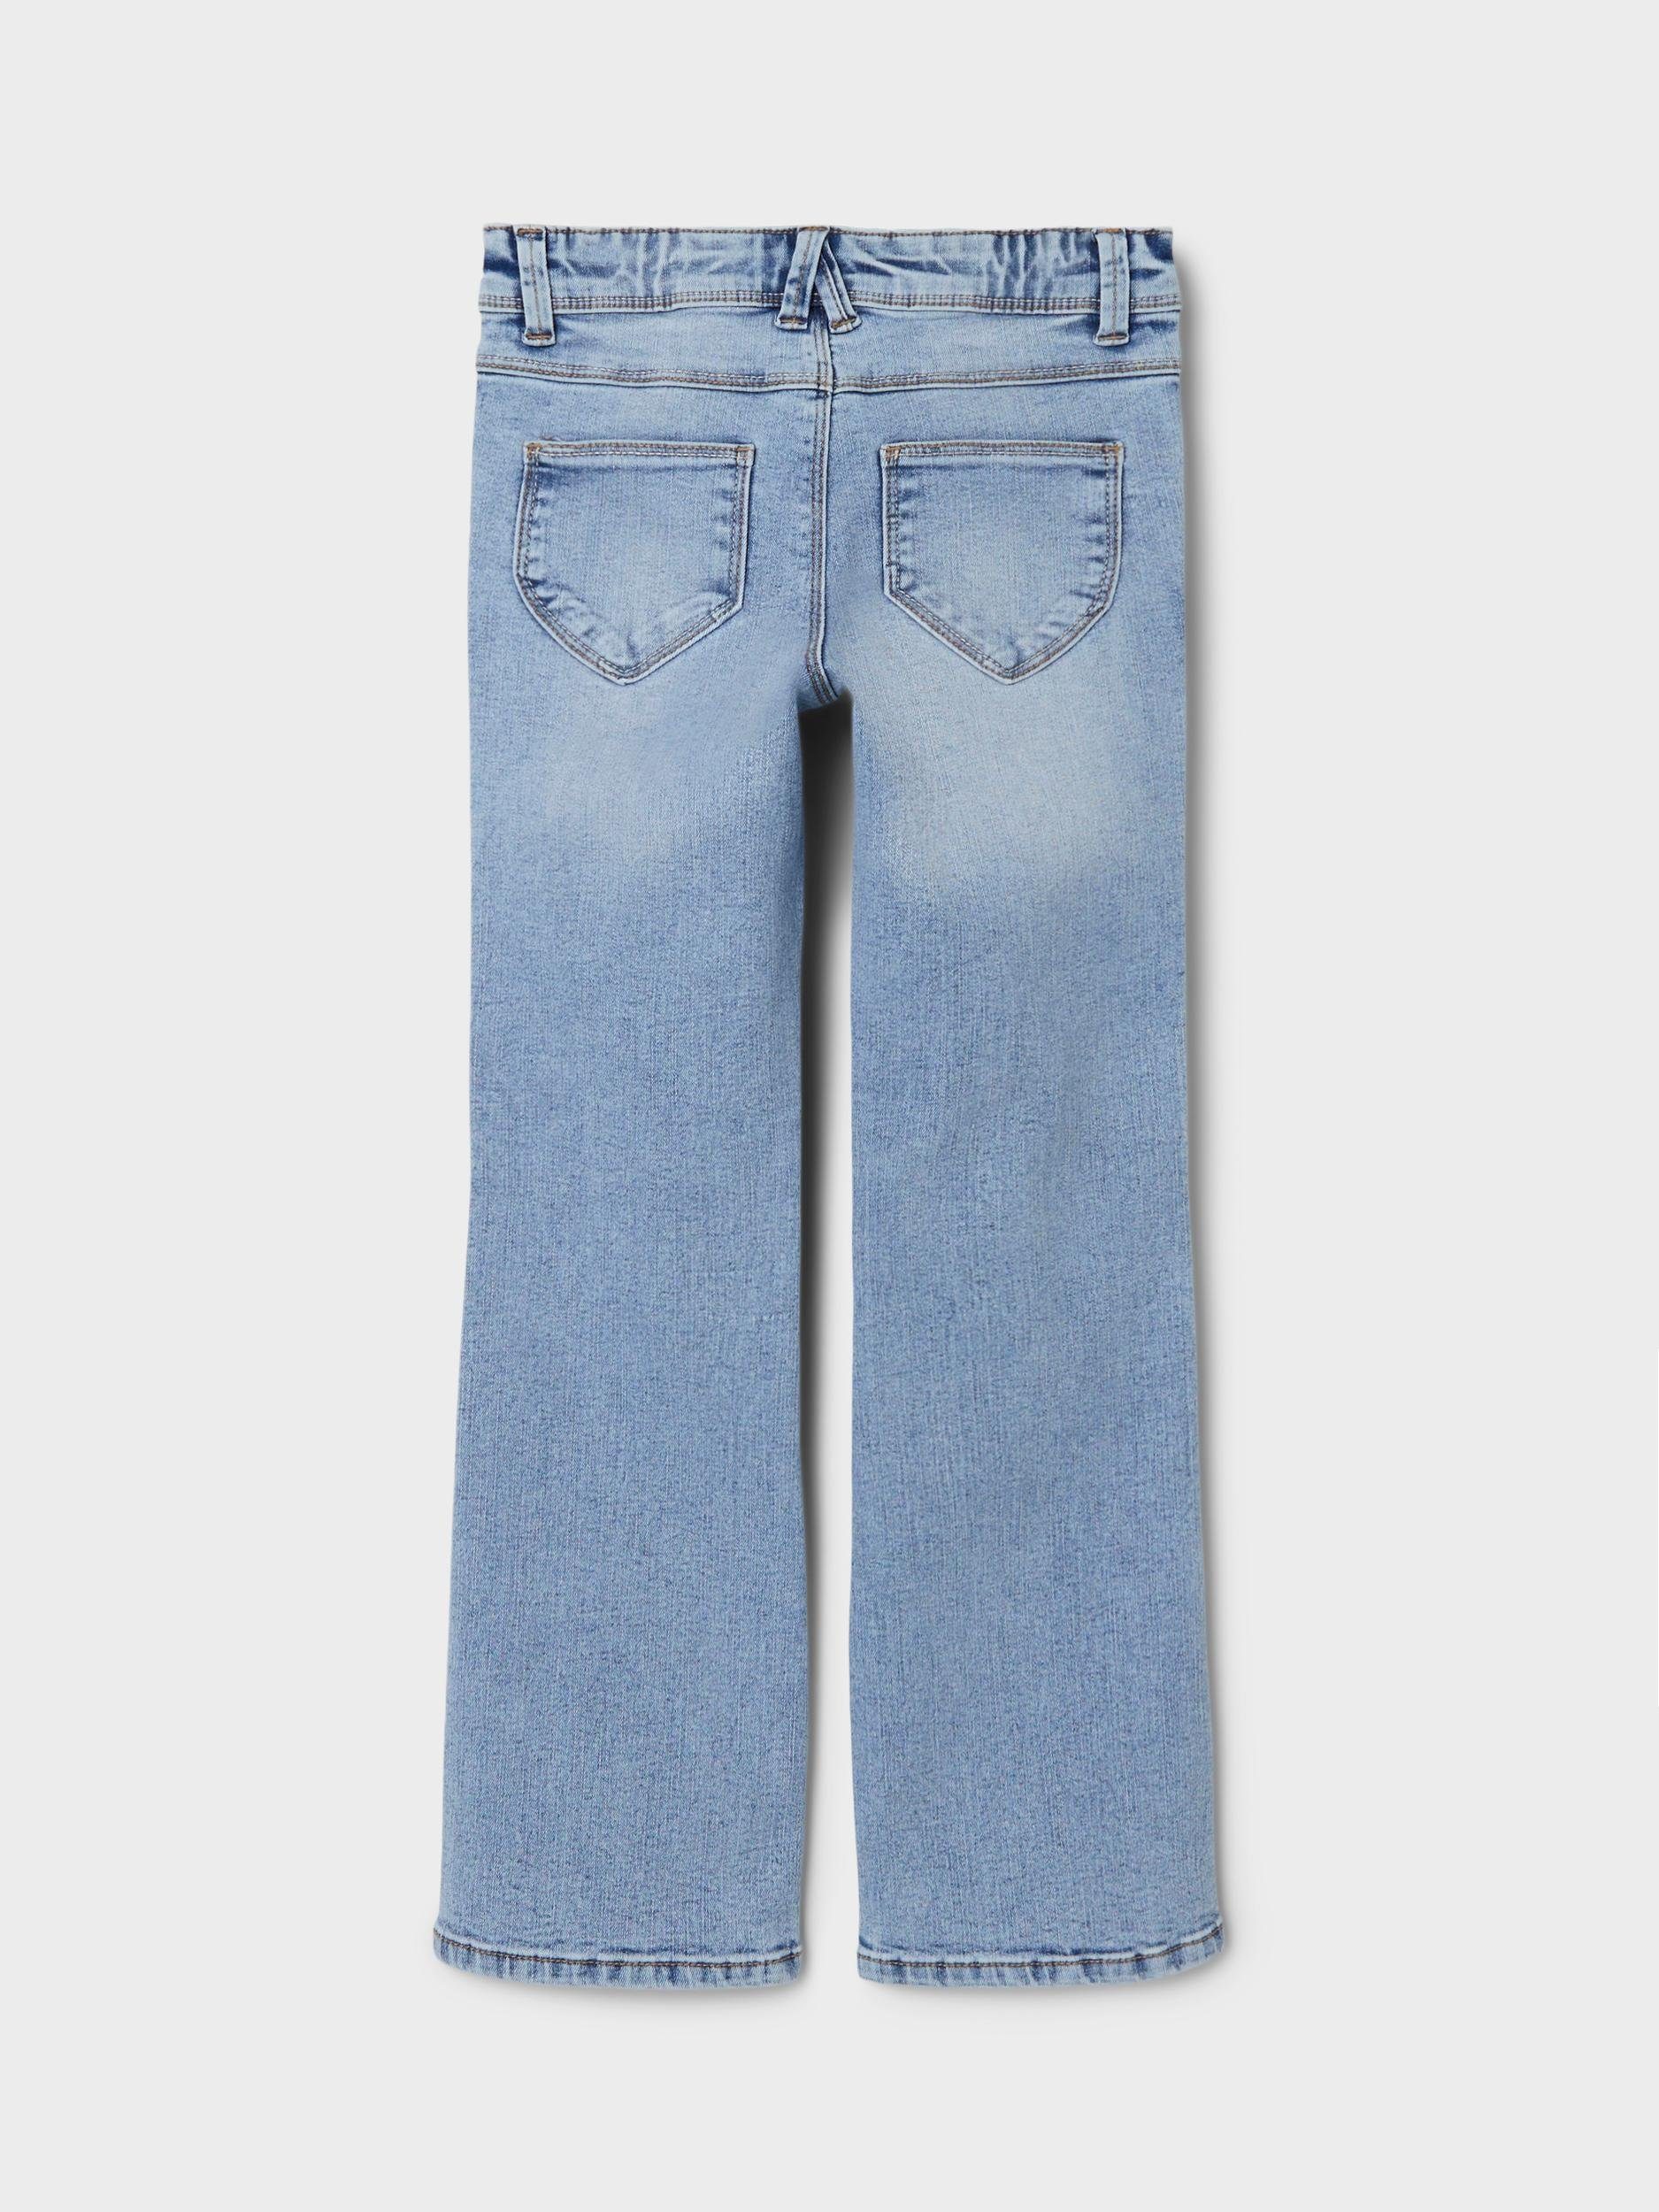 Name It Bootcut-Jeans NKFPOLLY mit BOOT Denim JEANS NOOS SKINNY Blue Light Stretch 1142-AU